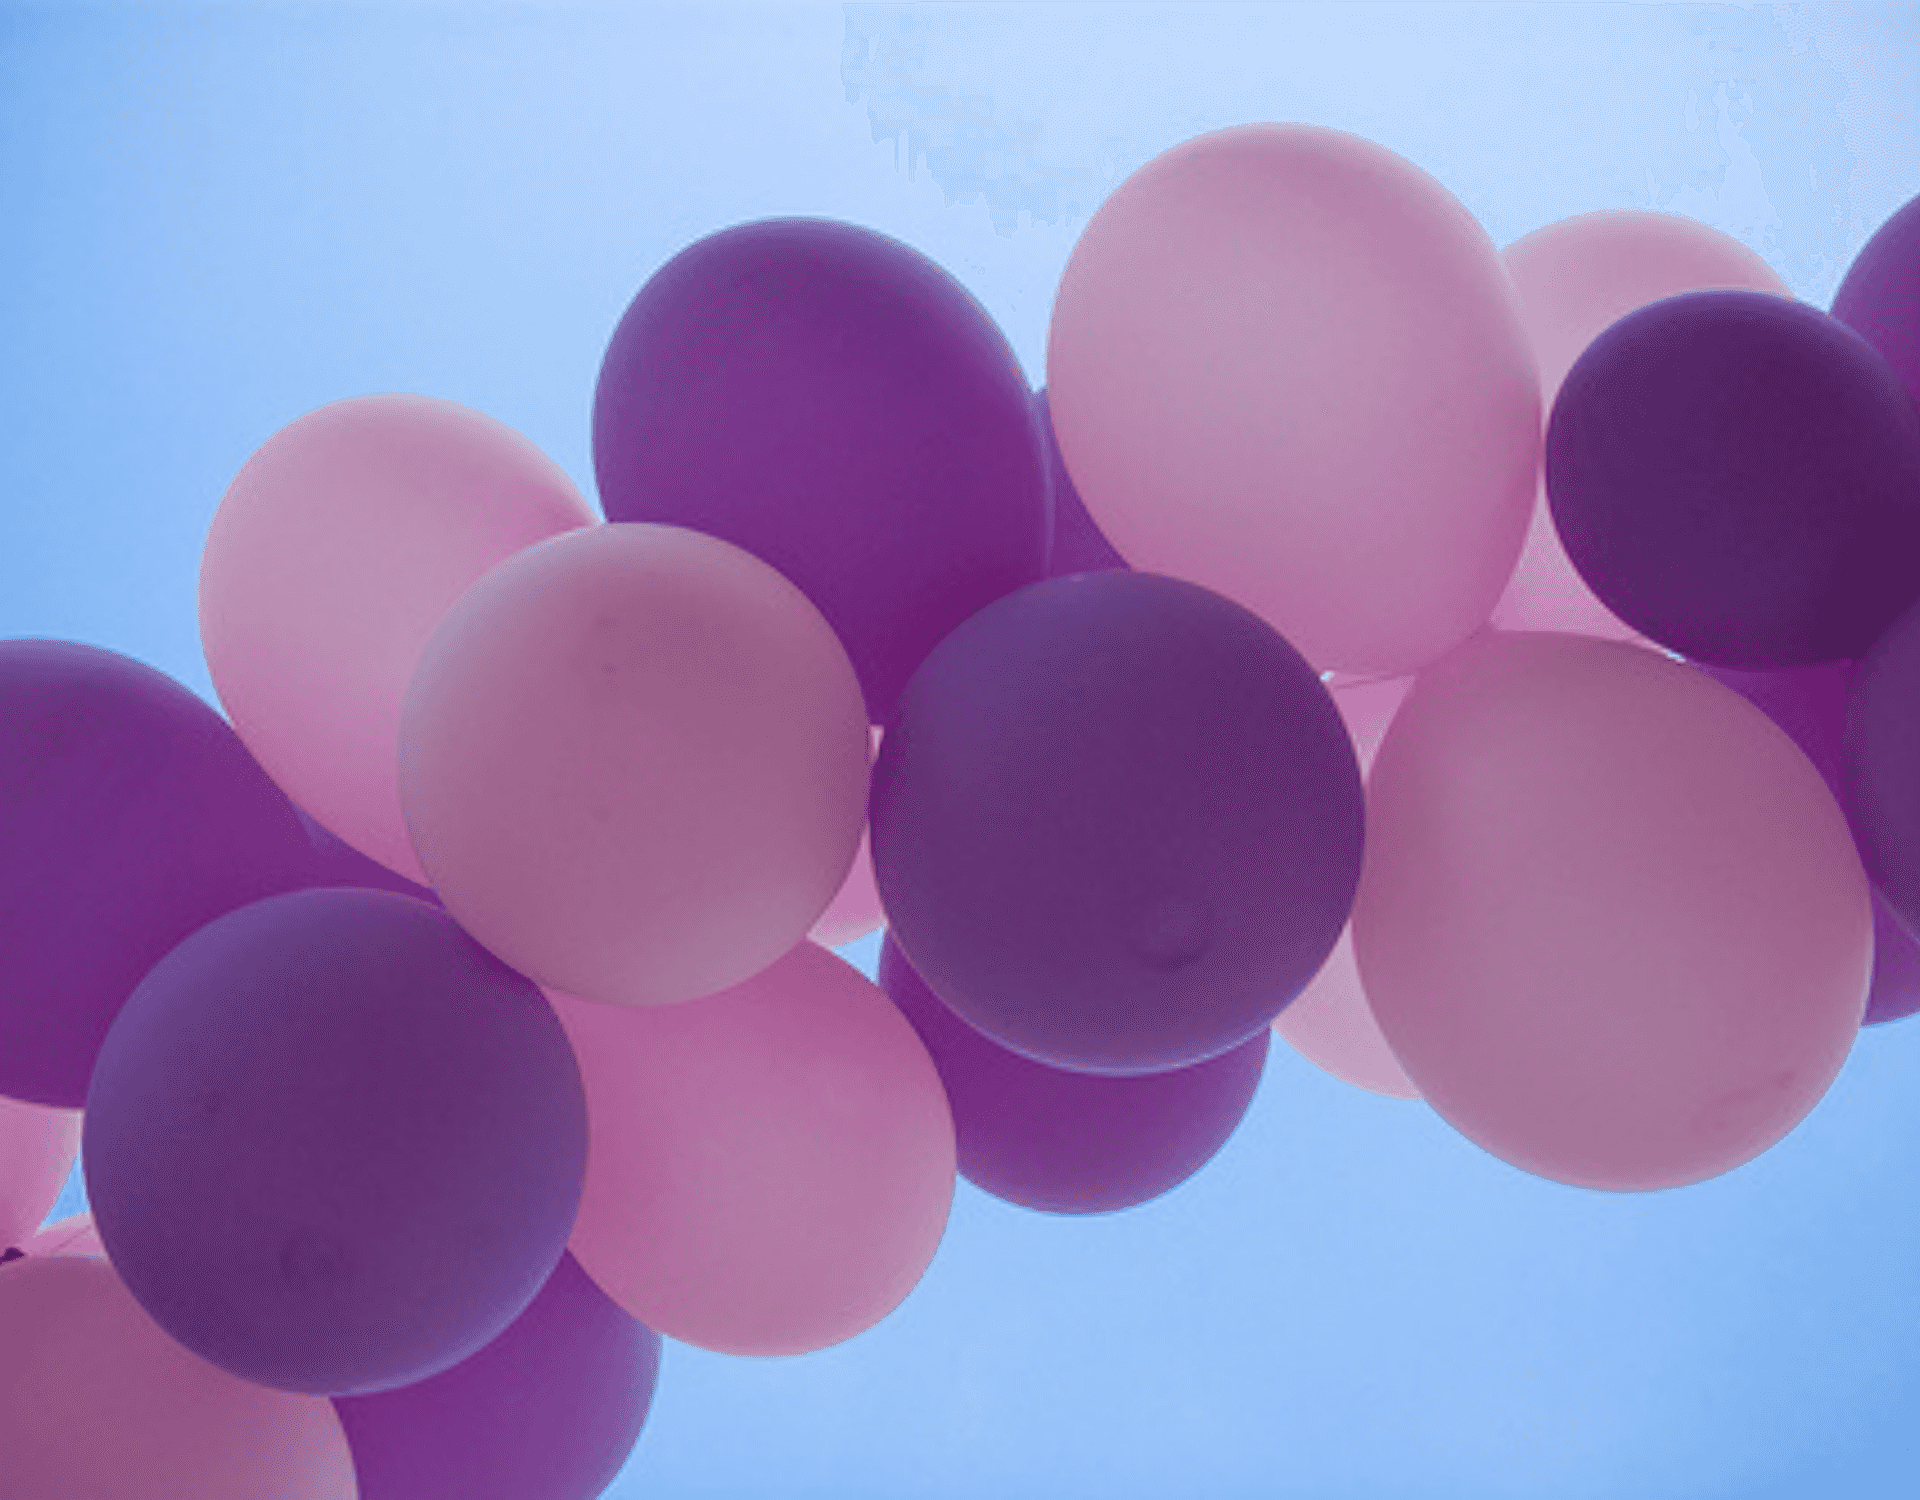 Image description: pink and purple balloons